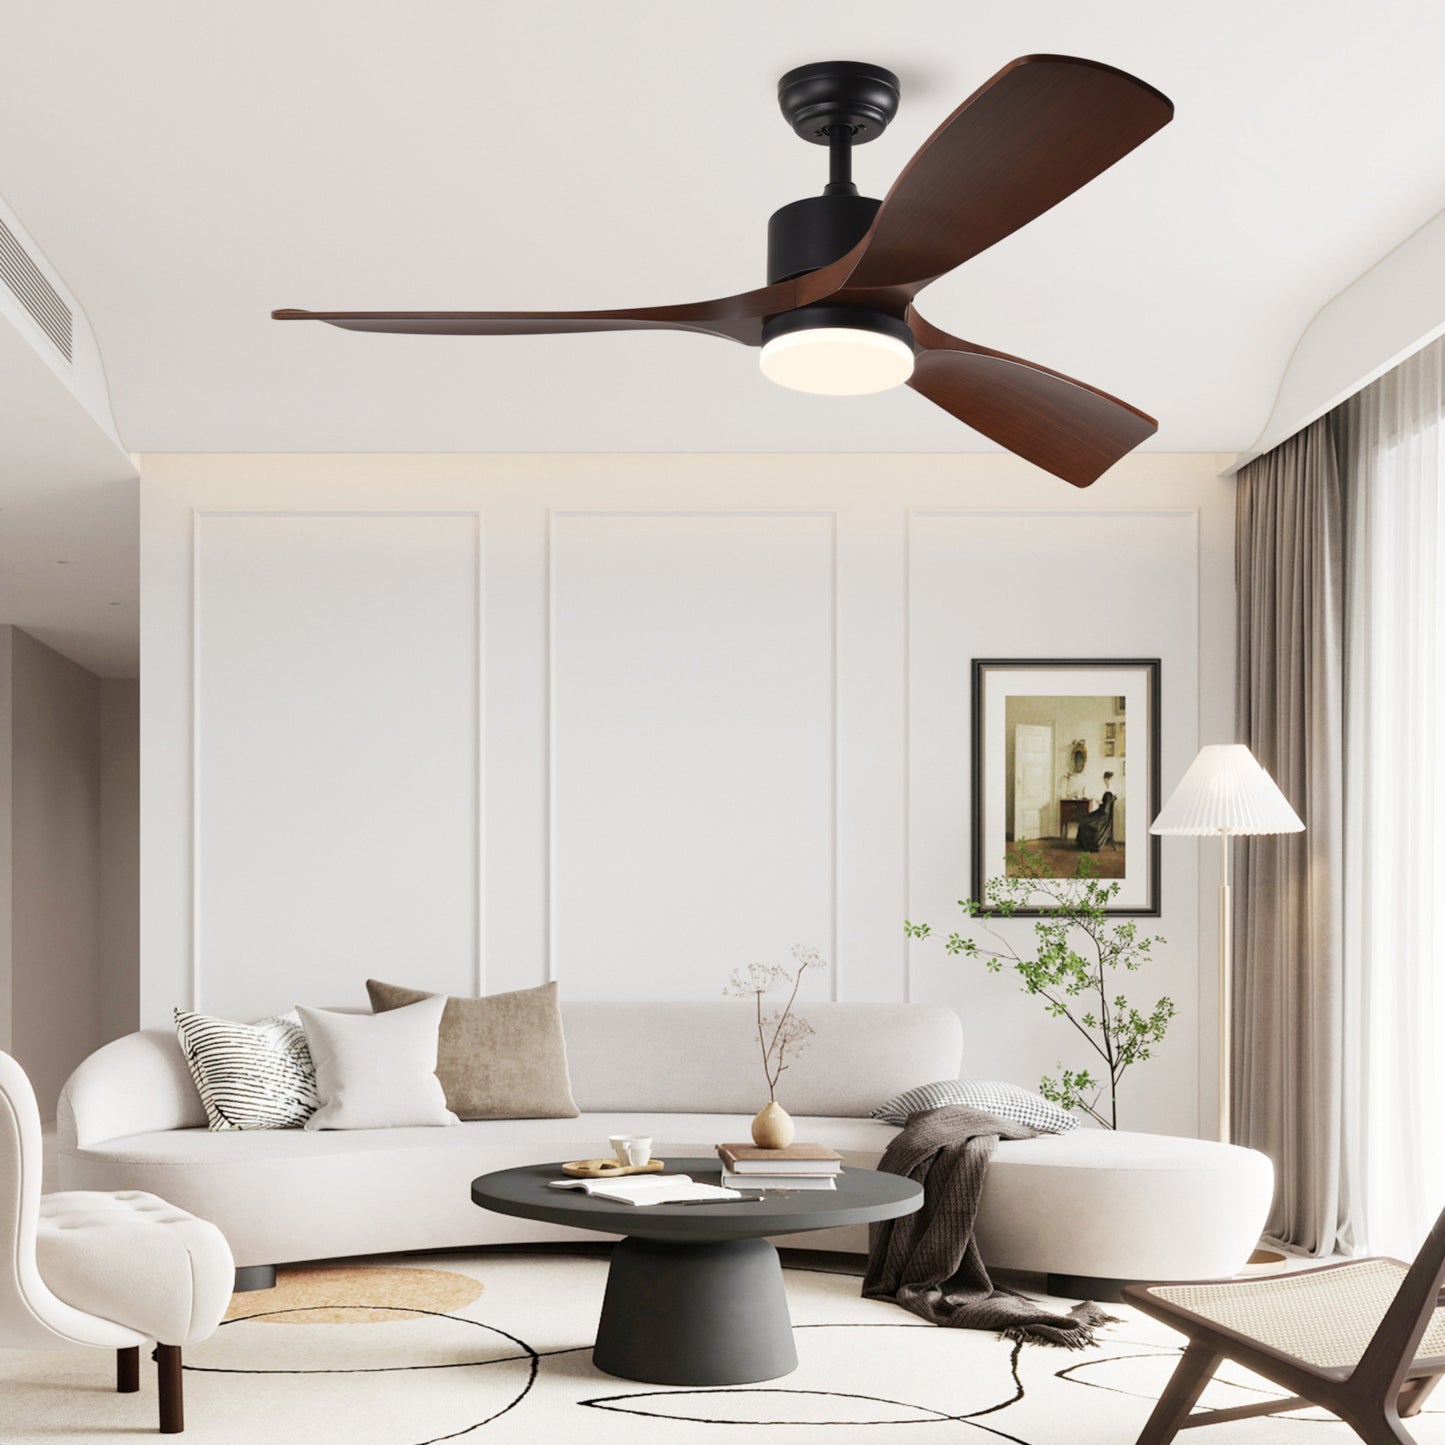 52" Black And Brown Propeller Three Blade Dimmable Remote Control Integrated Light Ceiling Fan